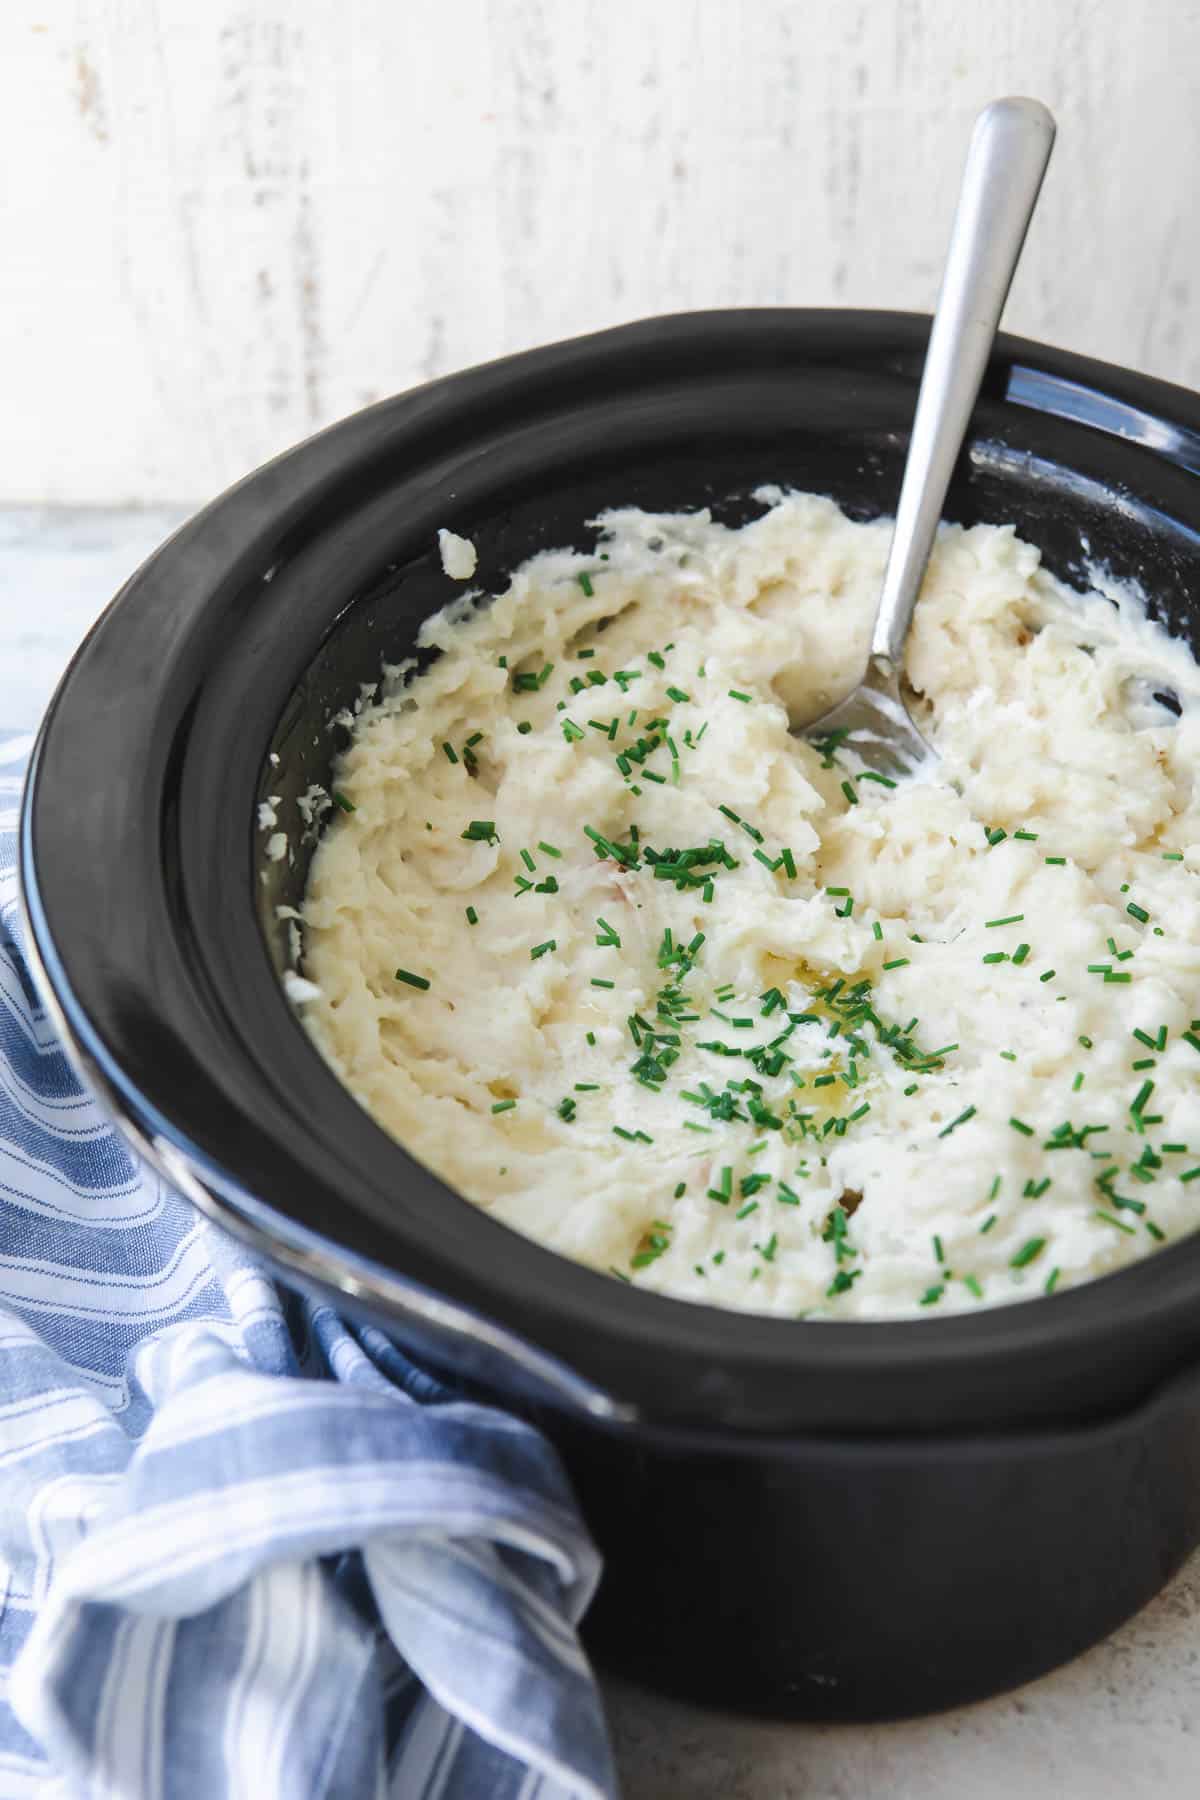 A crockpot full of mashed potatoes with chives on top.